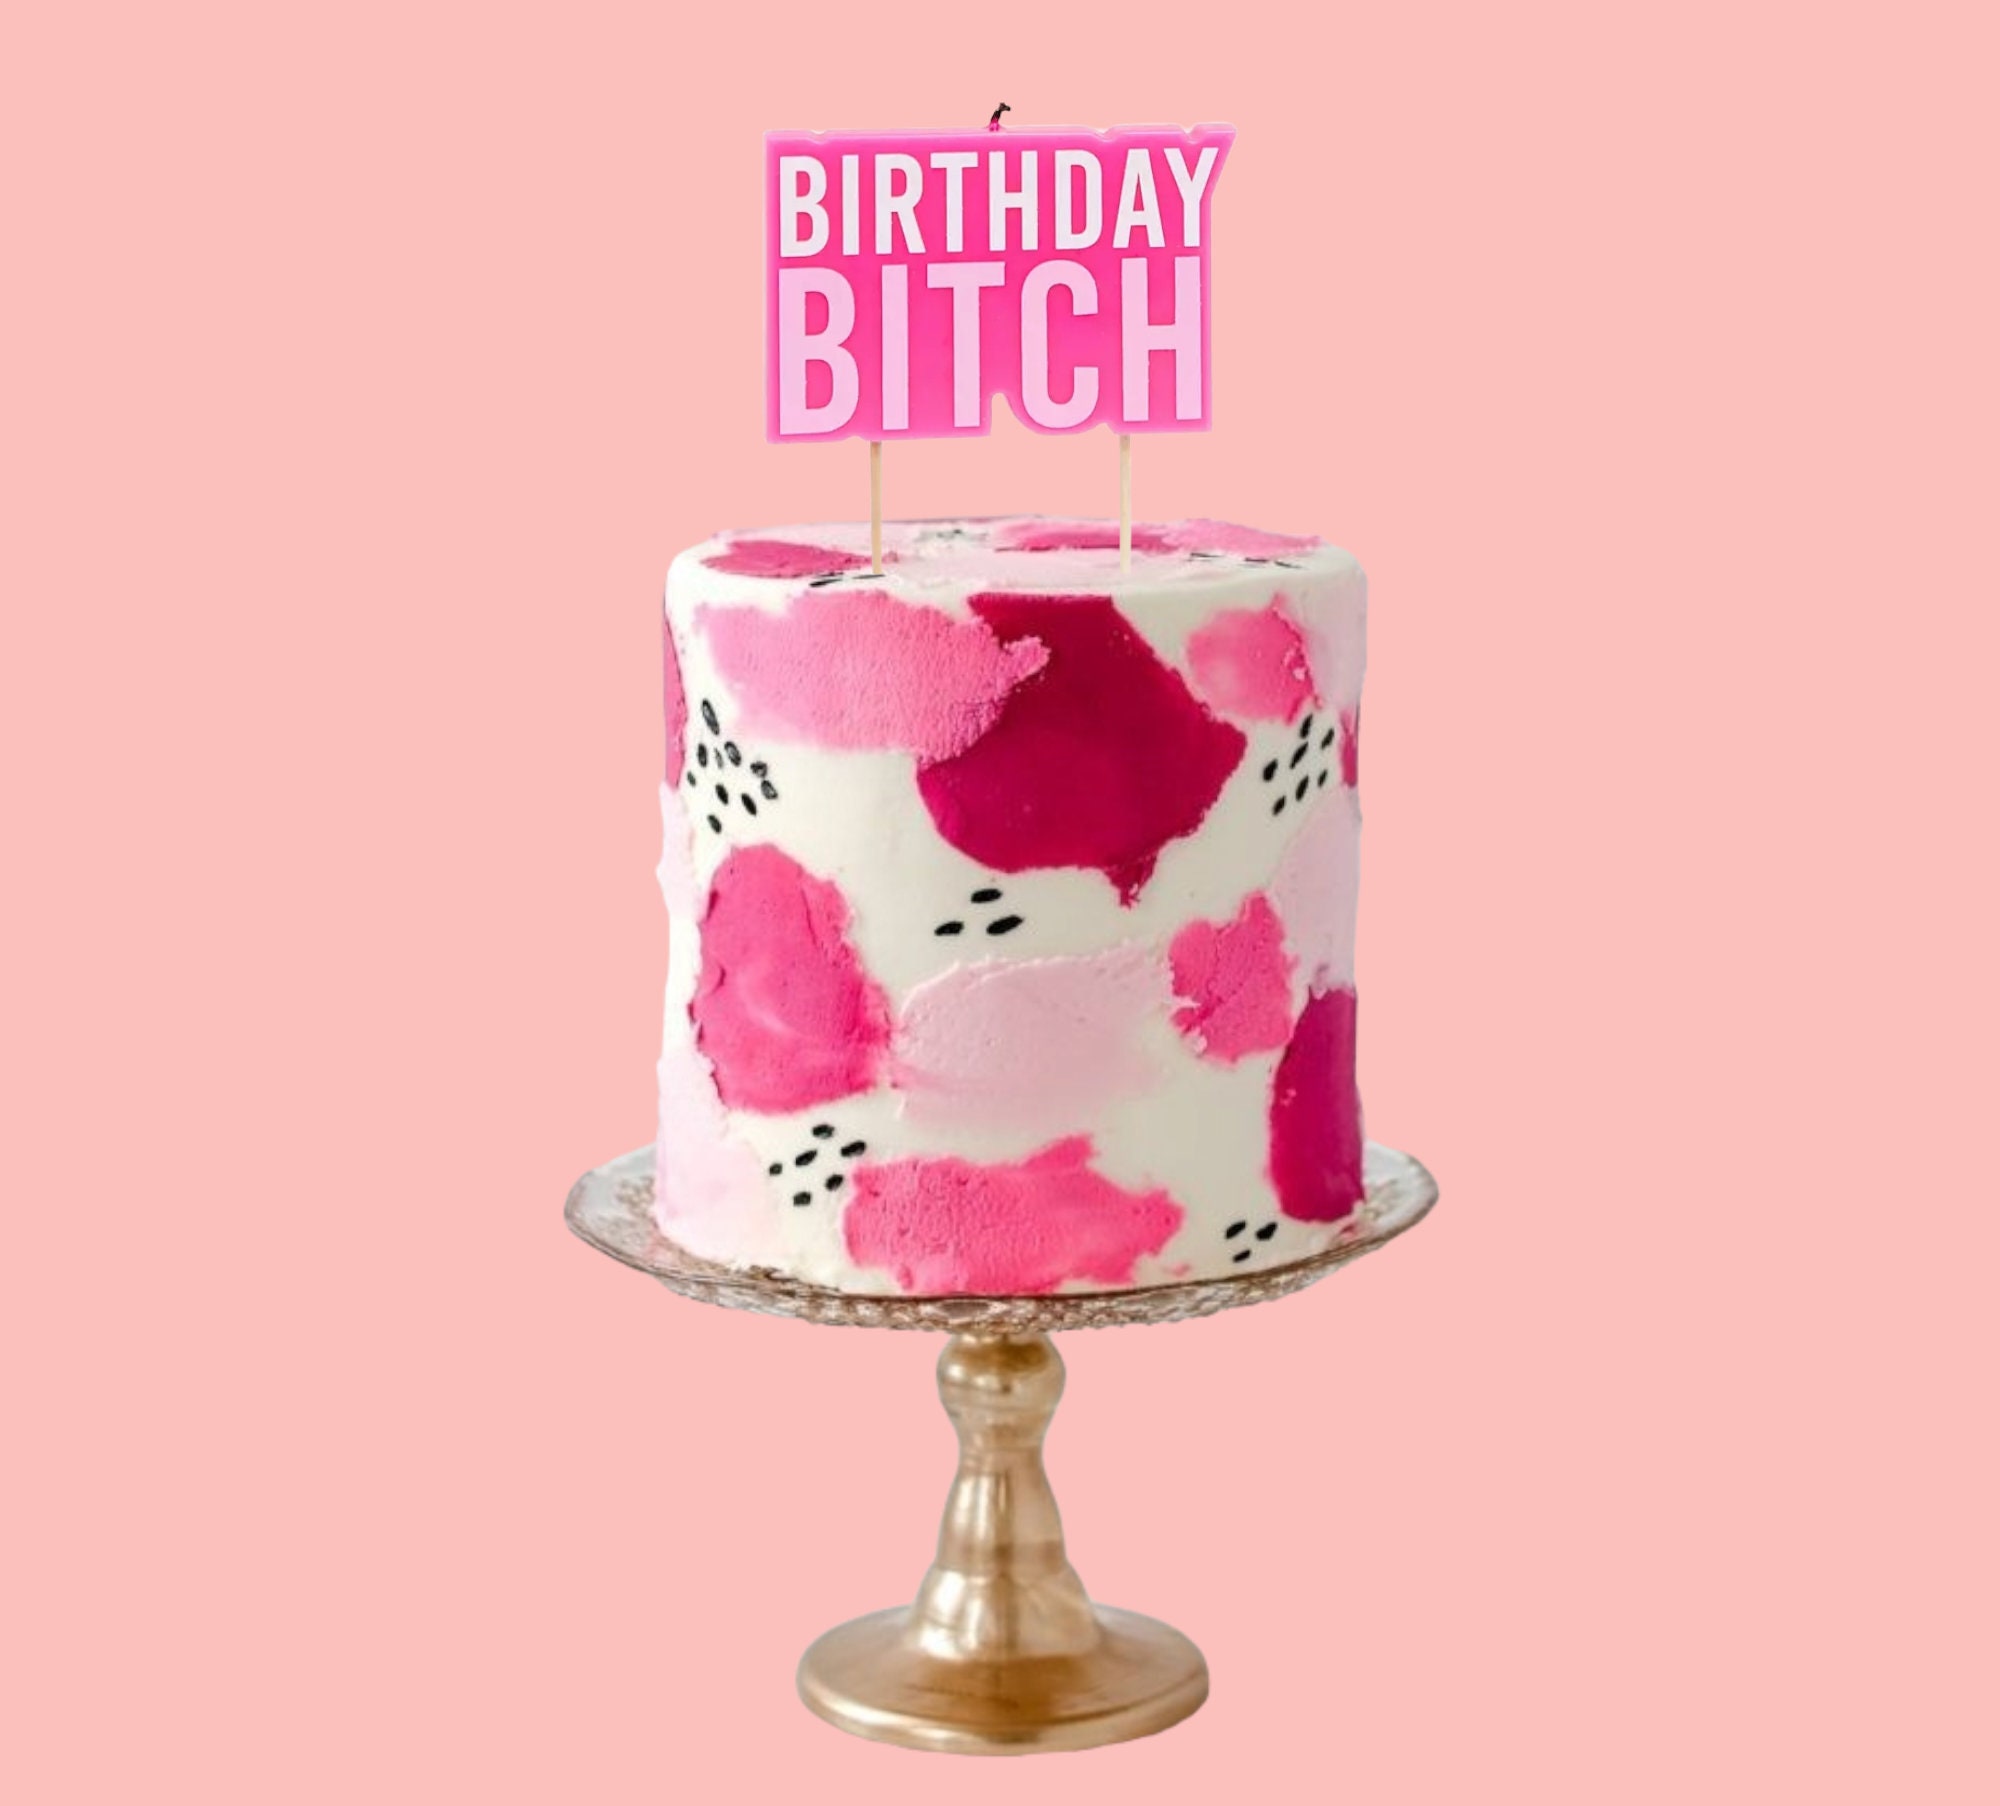 Funny Rude Adult Birthday Cake Candles S**t Youre Old 